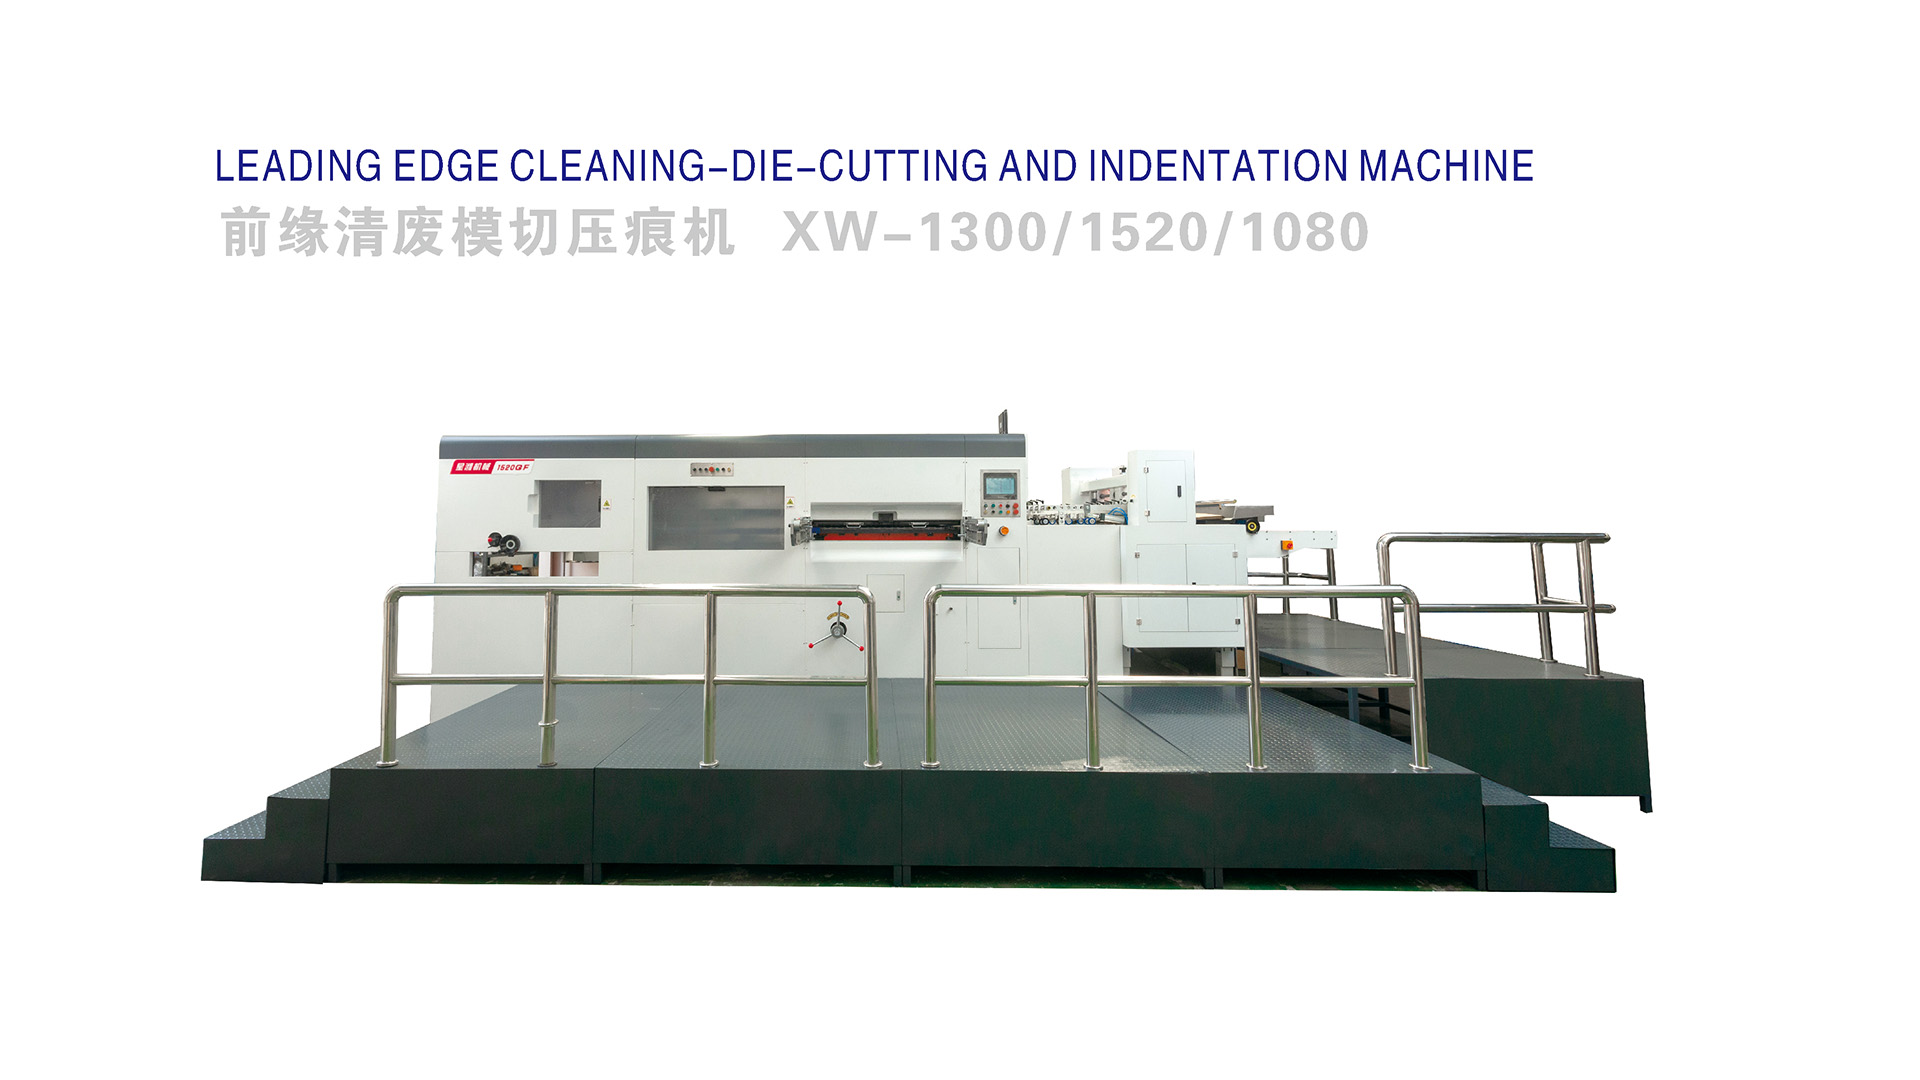 Leading edge cleaning-die-cutting and indentation machine